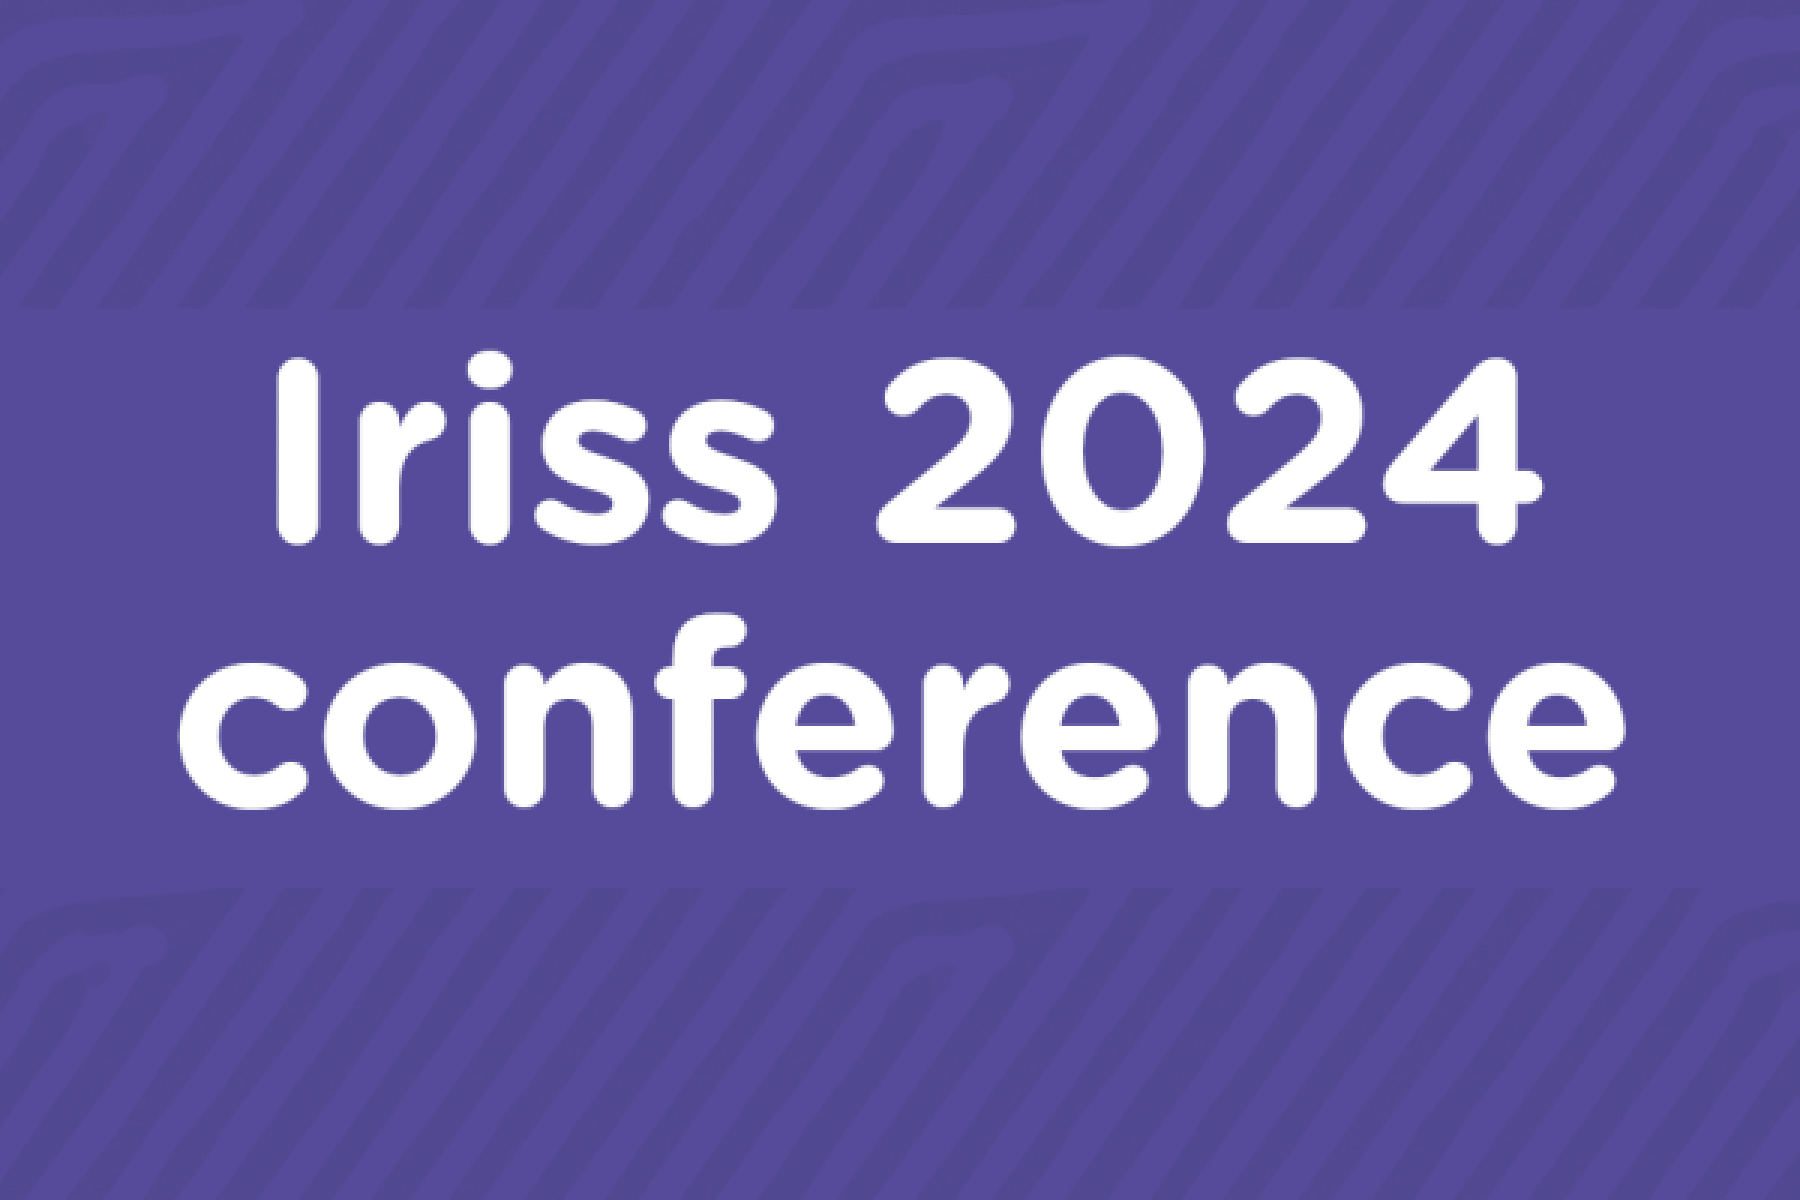 Iriss 2024 conference